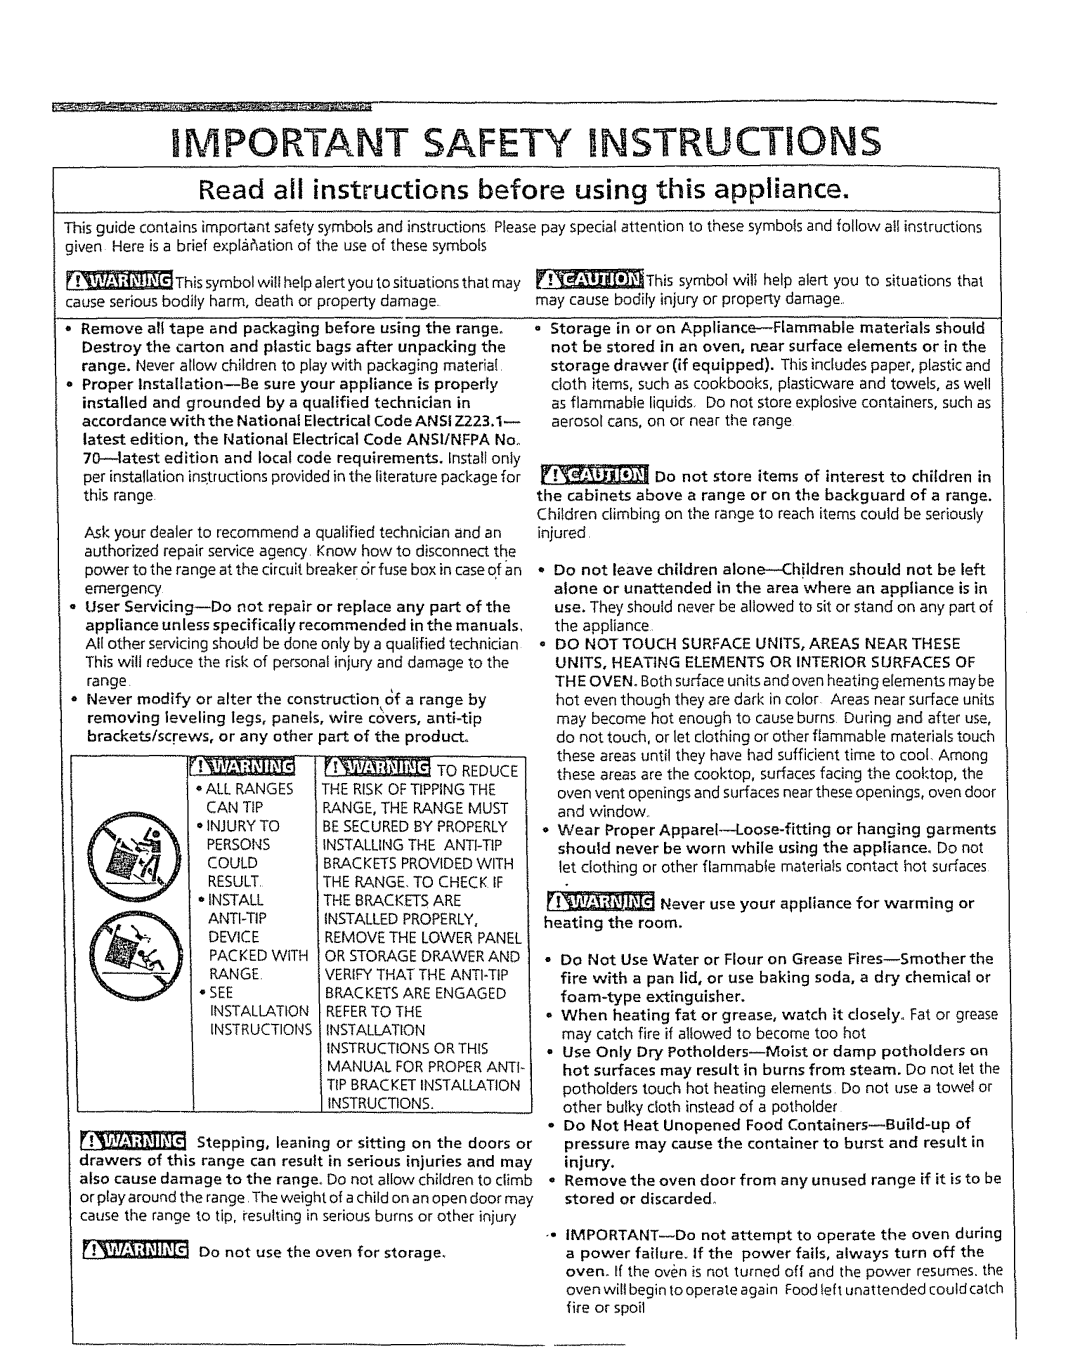 Kenmore 5303304549 manual Bmportant Safety Instructions, Read all instructions before using this appliance 